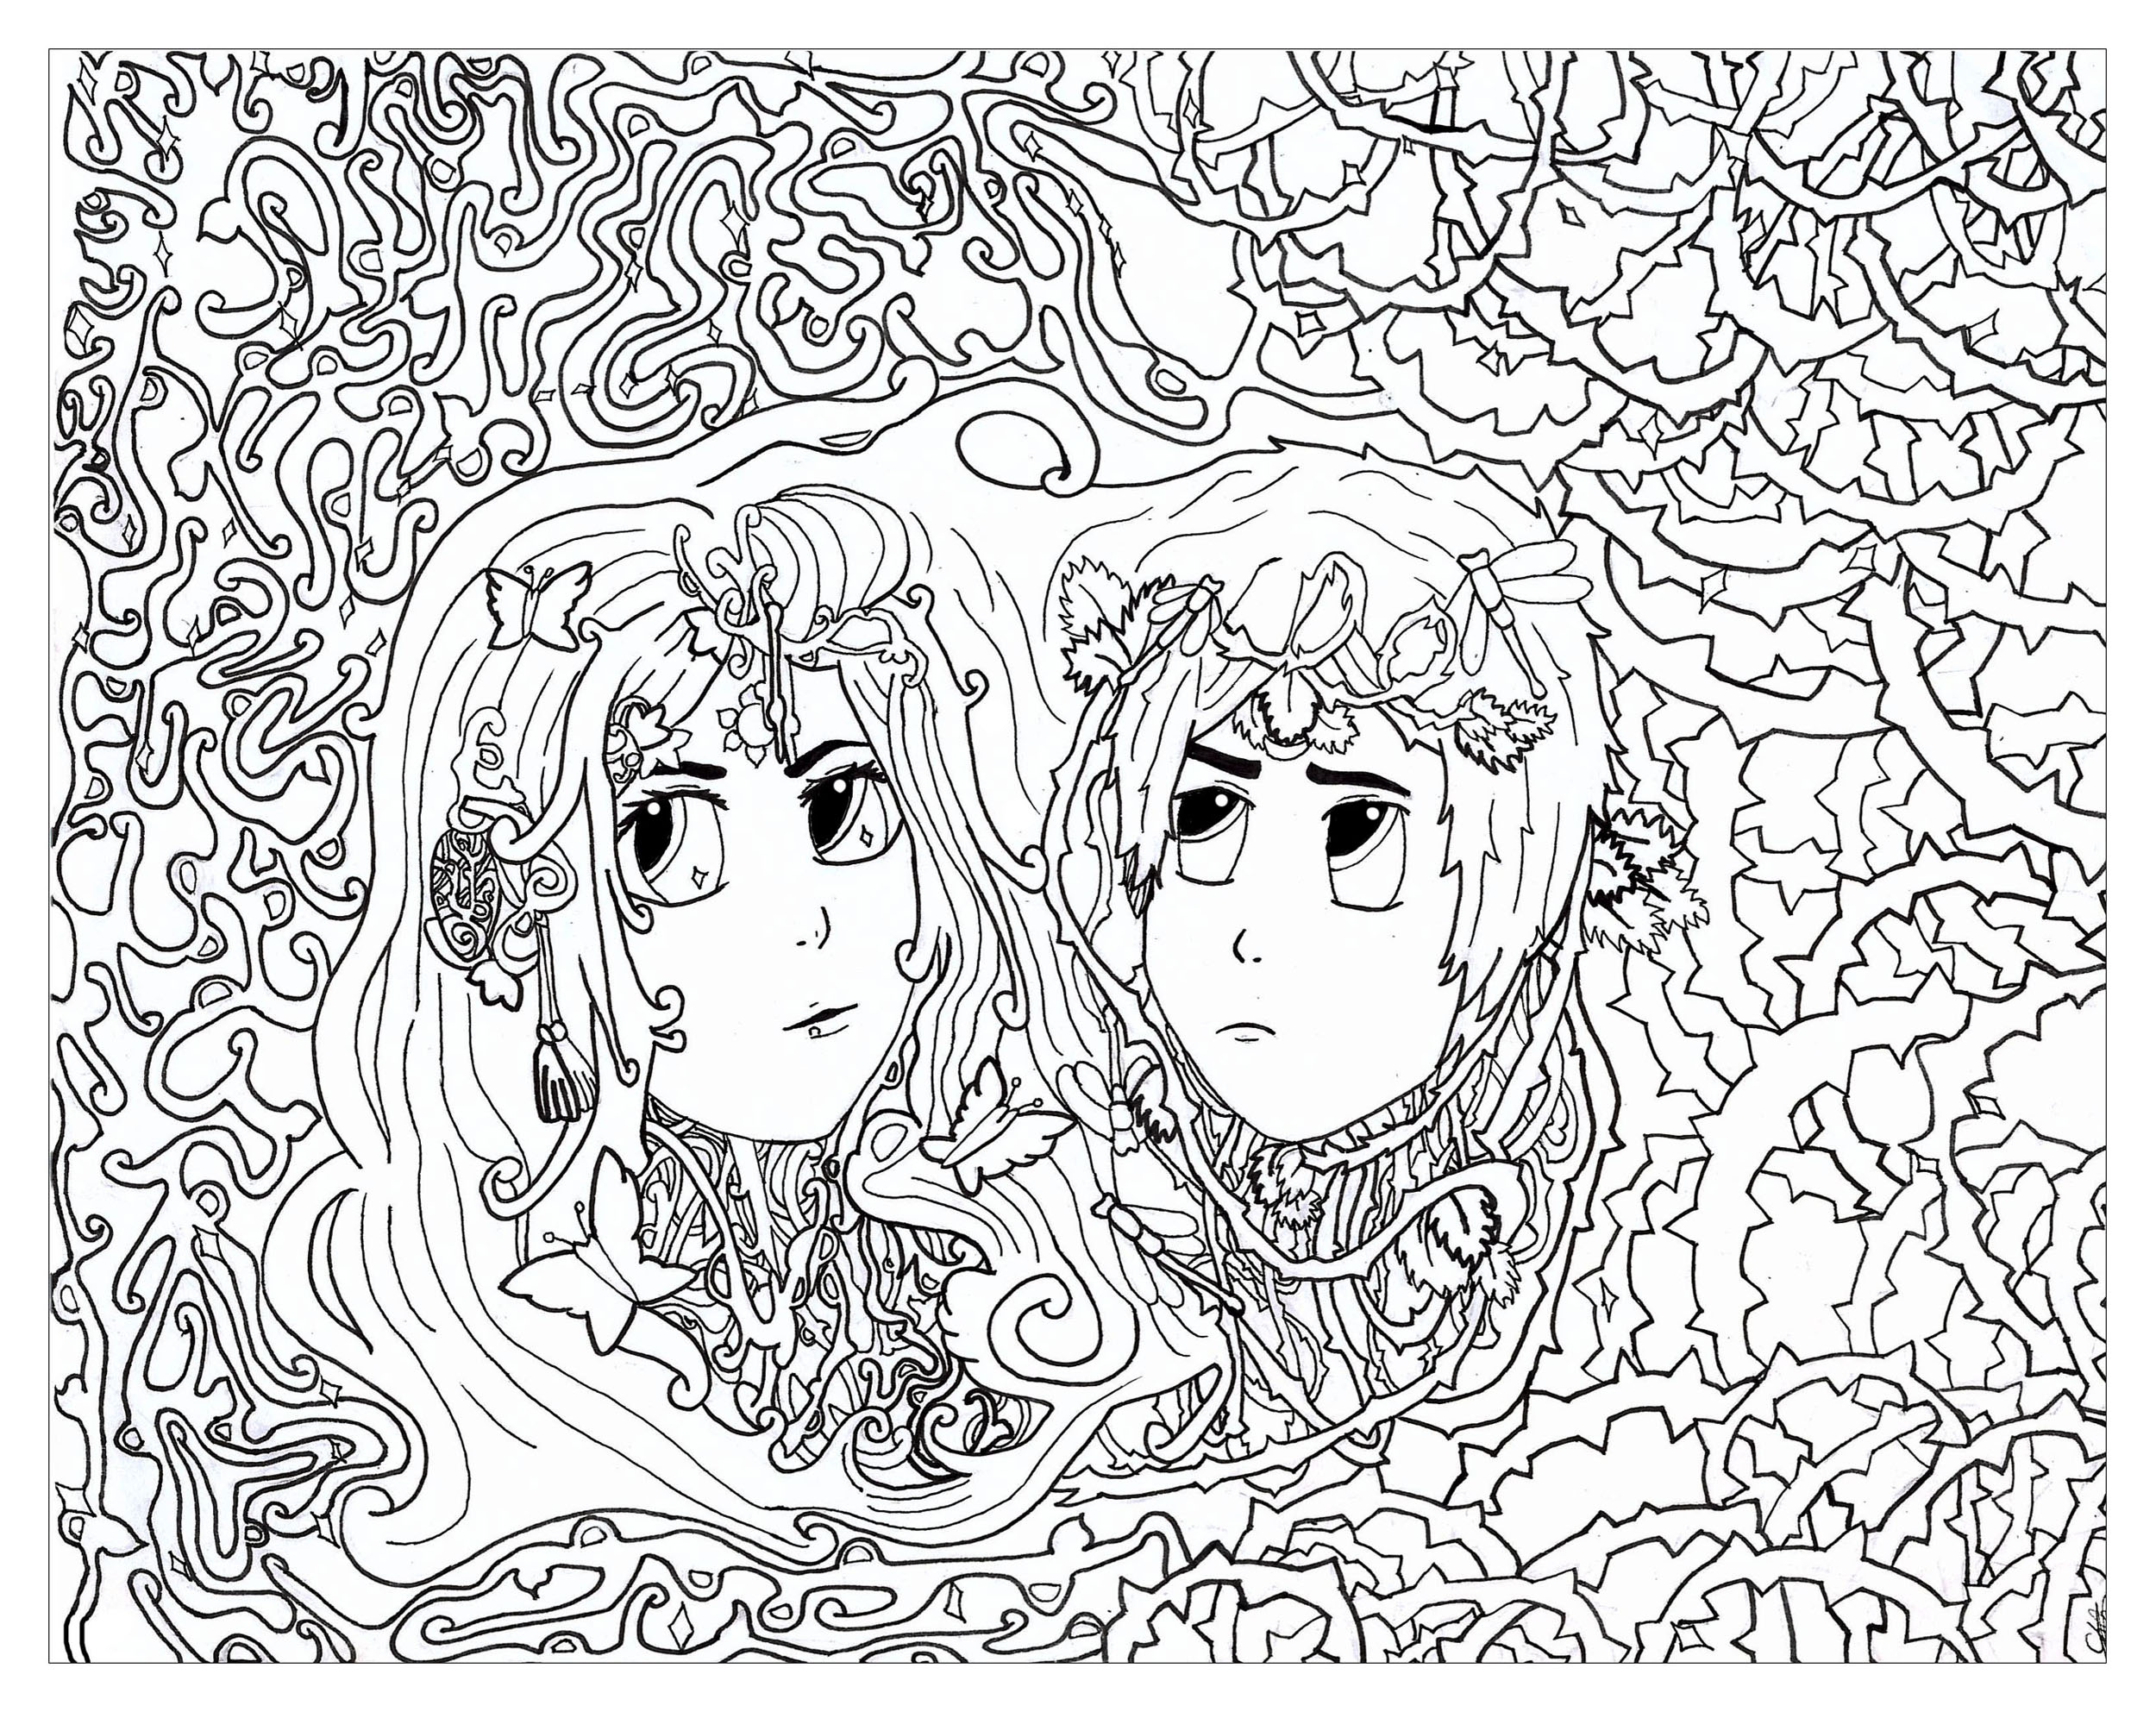 Coloring page inspired by The zodiac sign of Gemini, Artist : Chloe